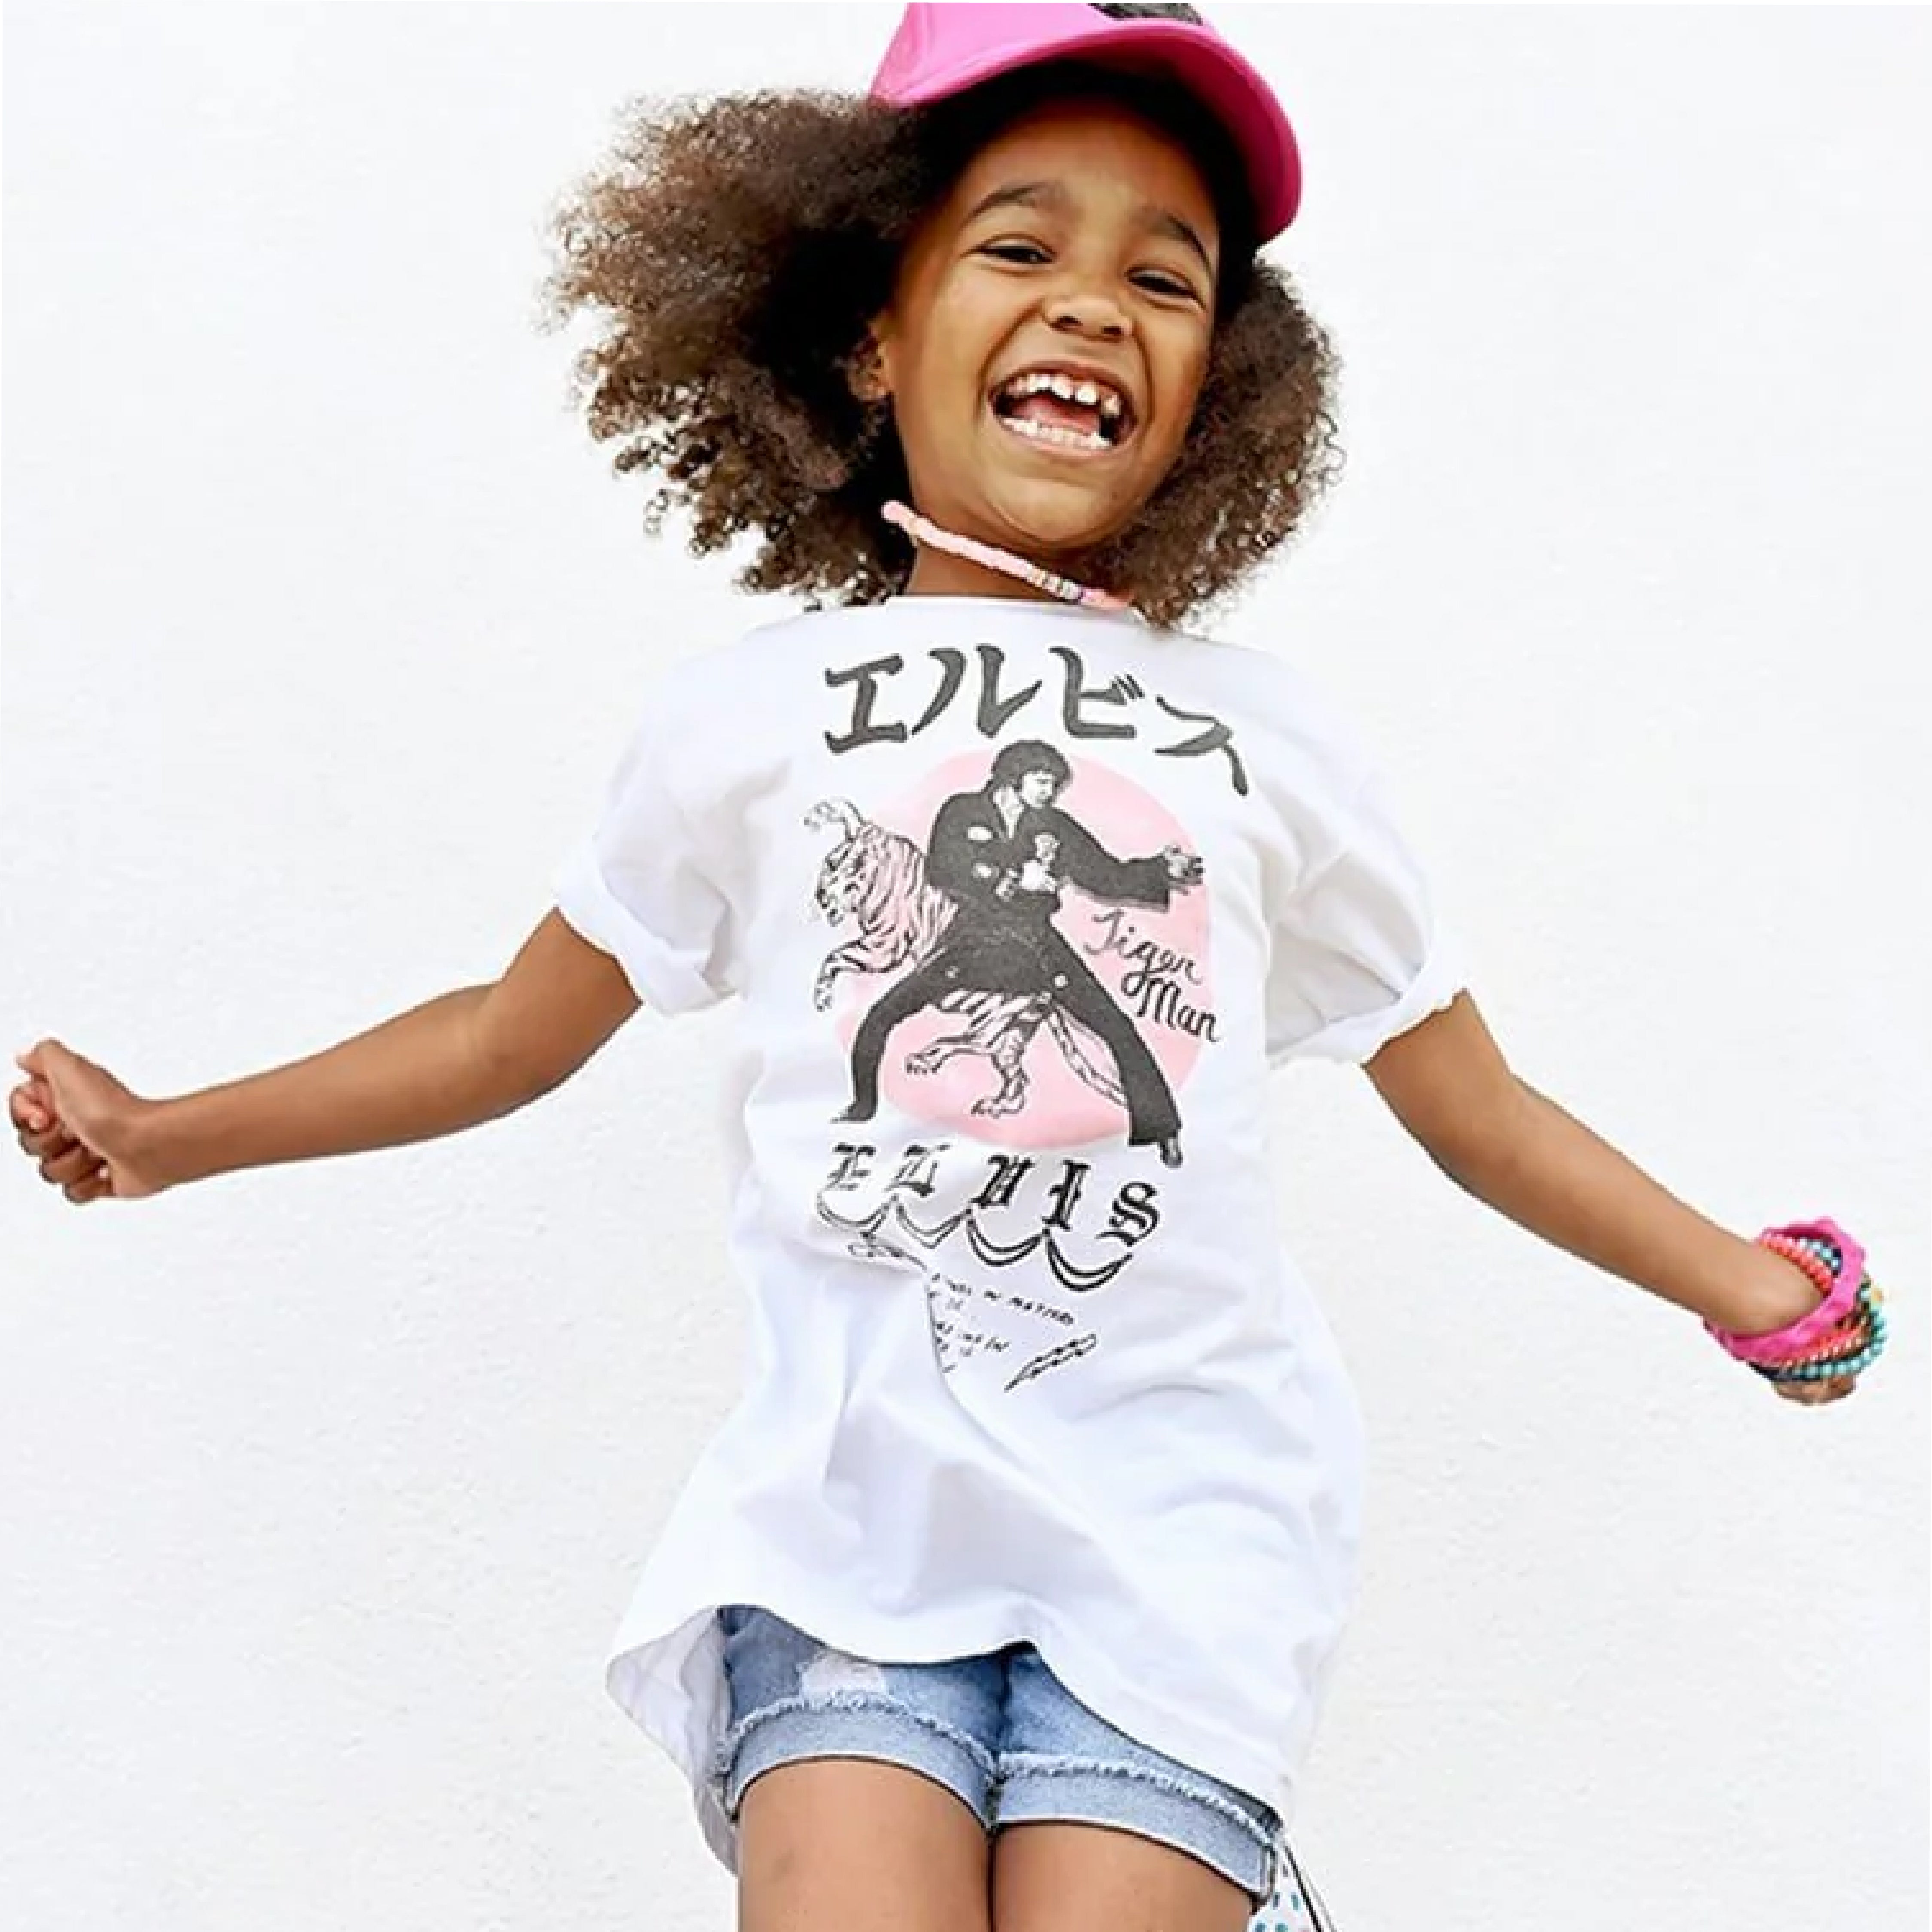 Happy young girl jumping, wearing a graphic t-shirt and a baseball cap.